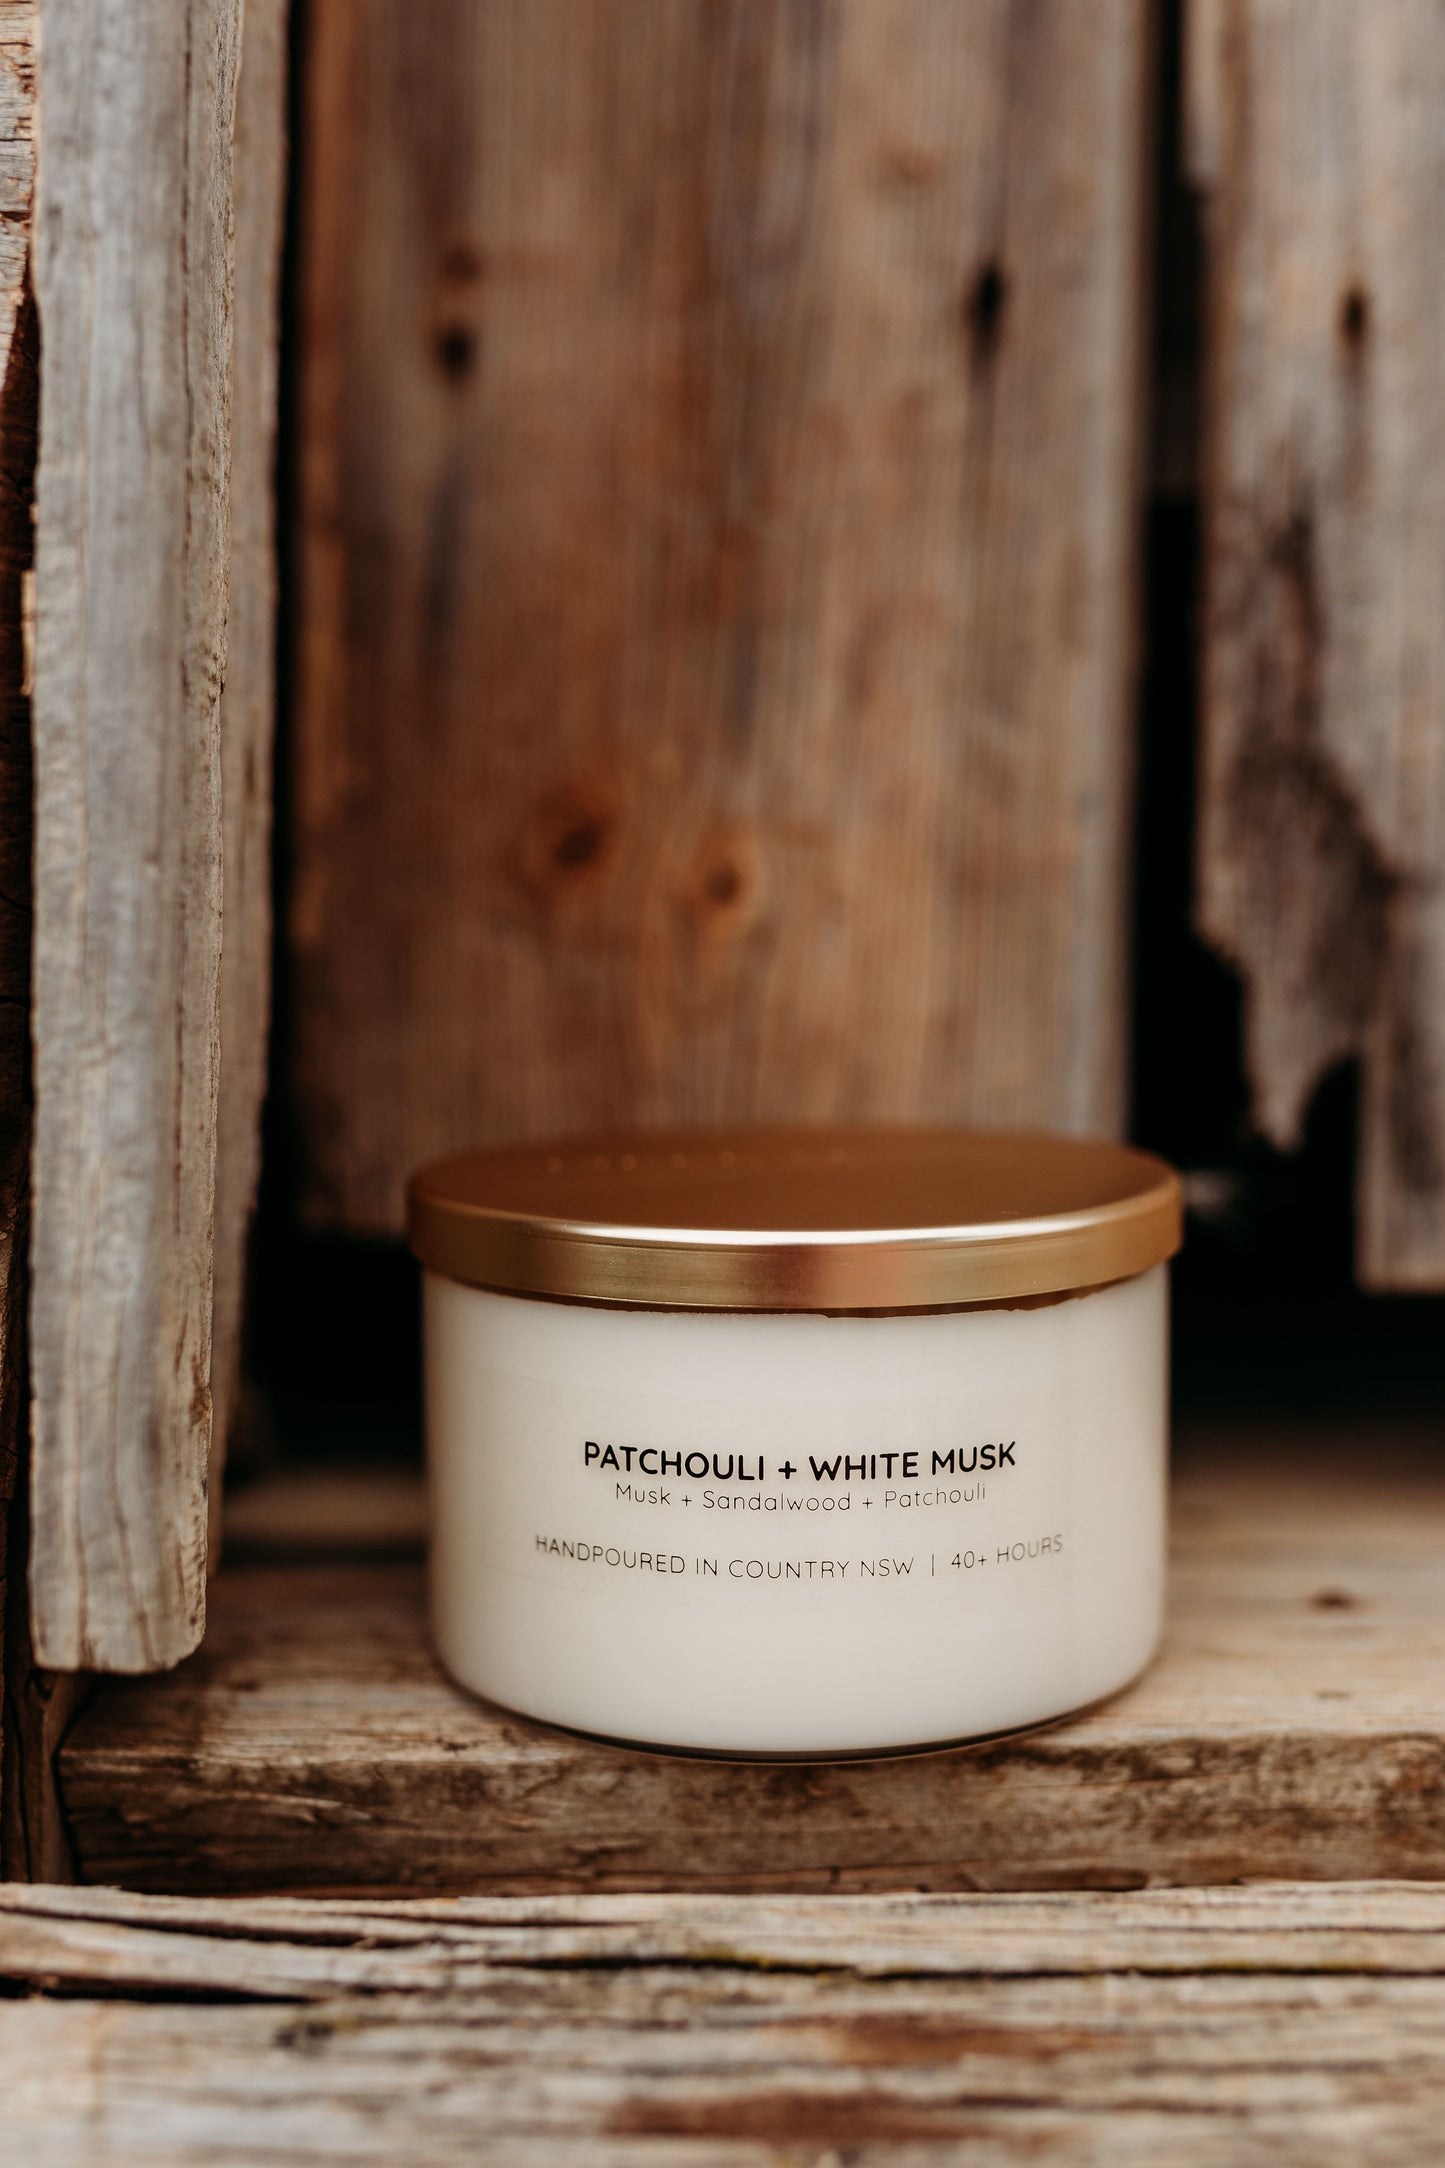 Meeraboo - Patchouli + White Musk Gold Lid Soy Candle